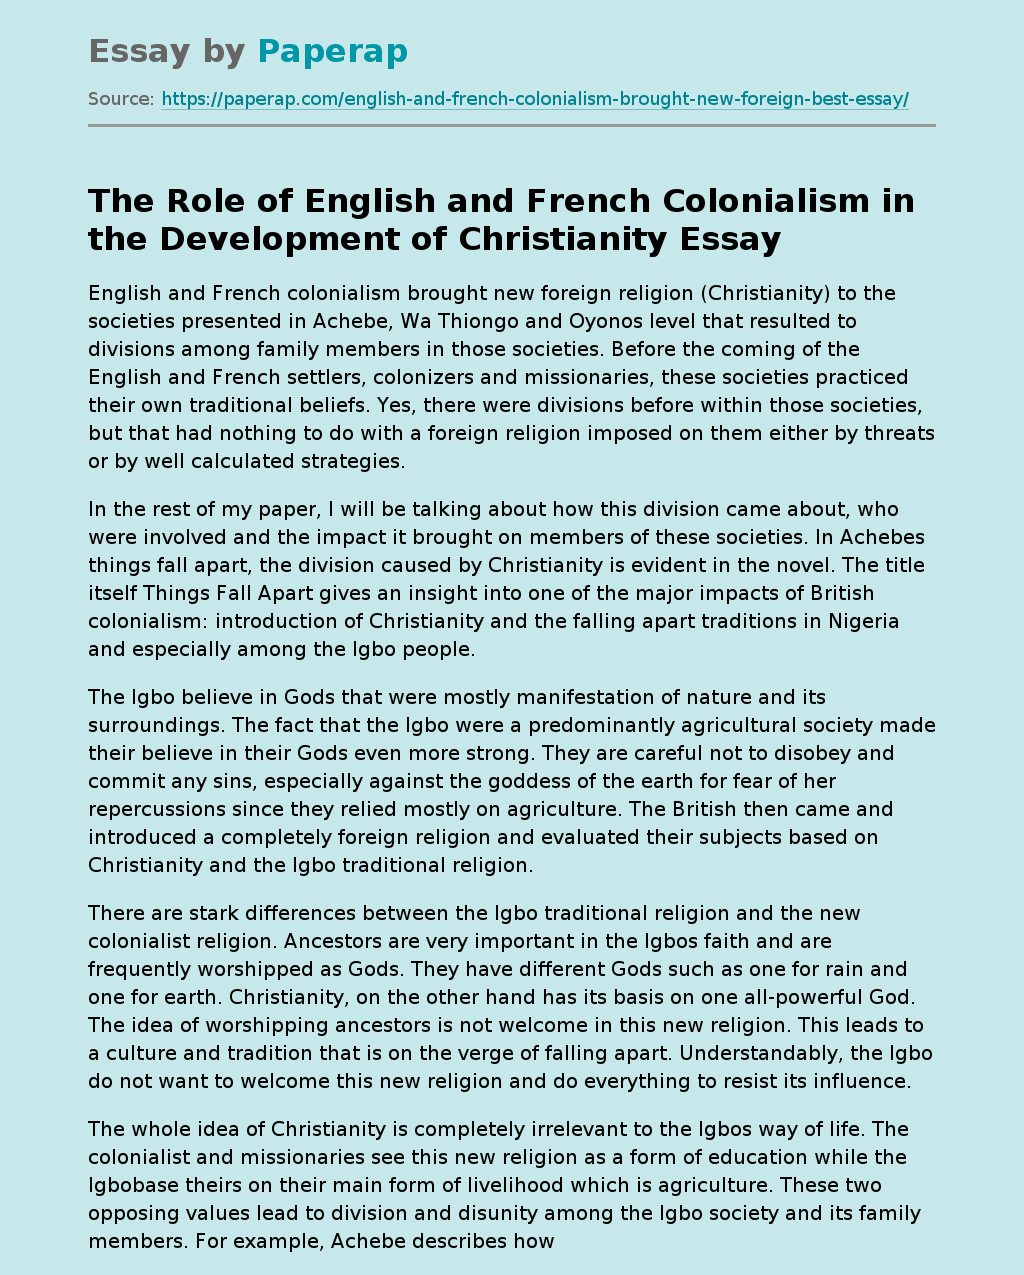 The Role of English and French Colonialism in the Development of Christianity